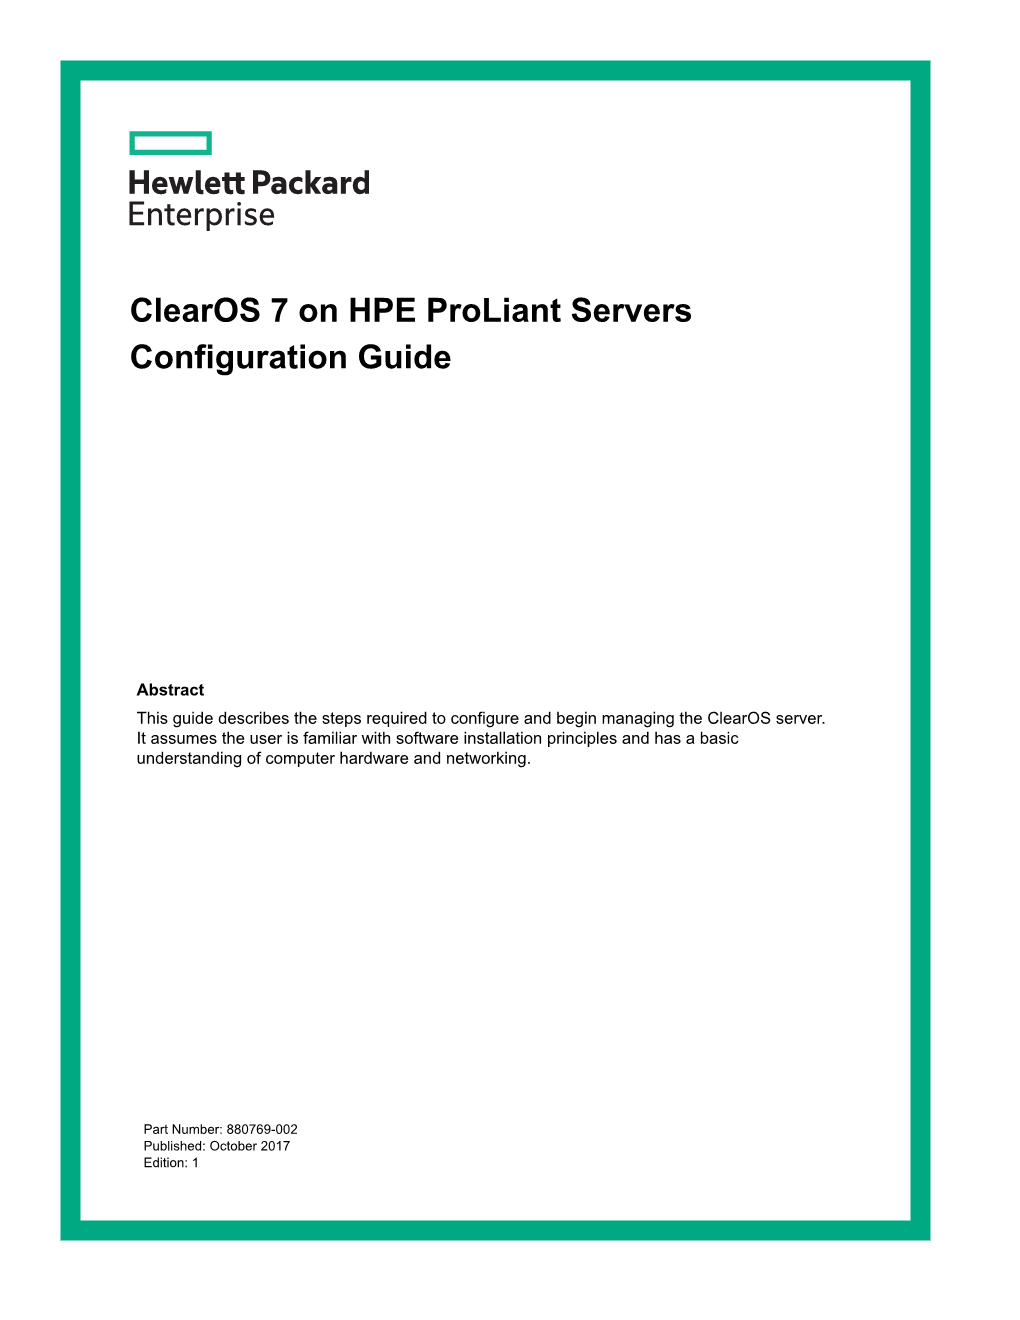 Clearos 7 on HPE Proliant Servers Configuration Guide